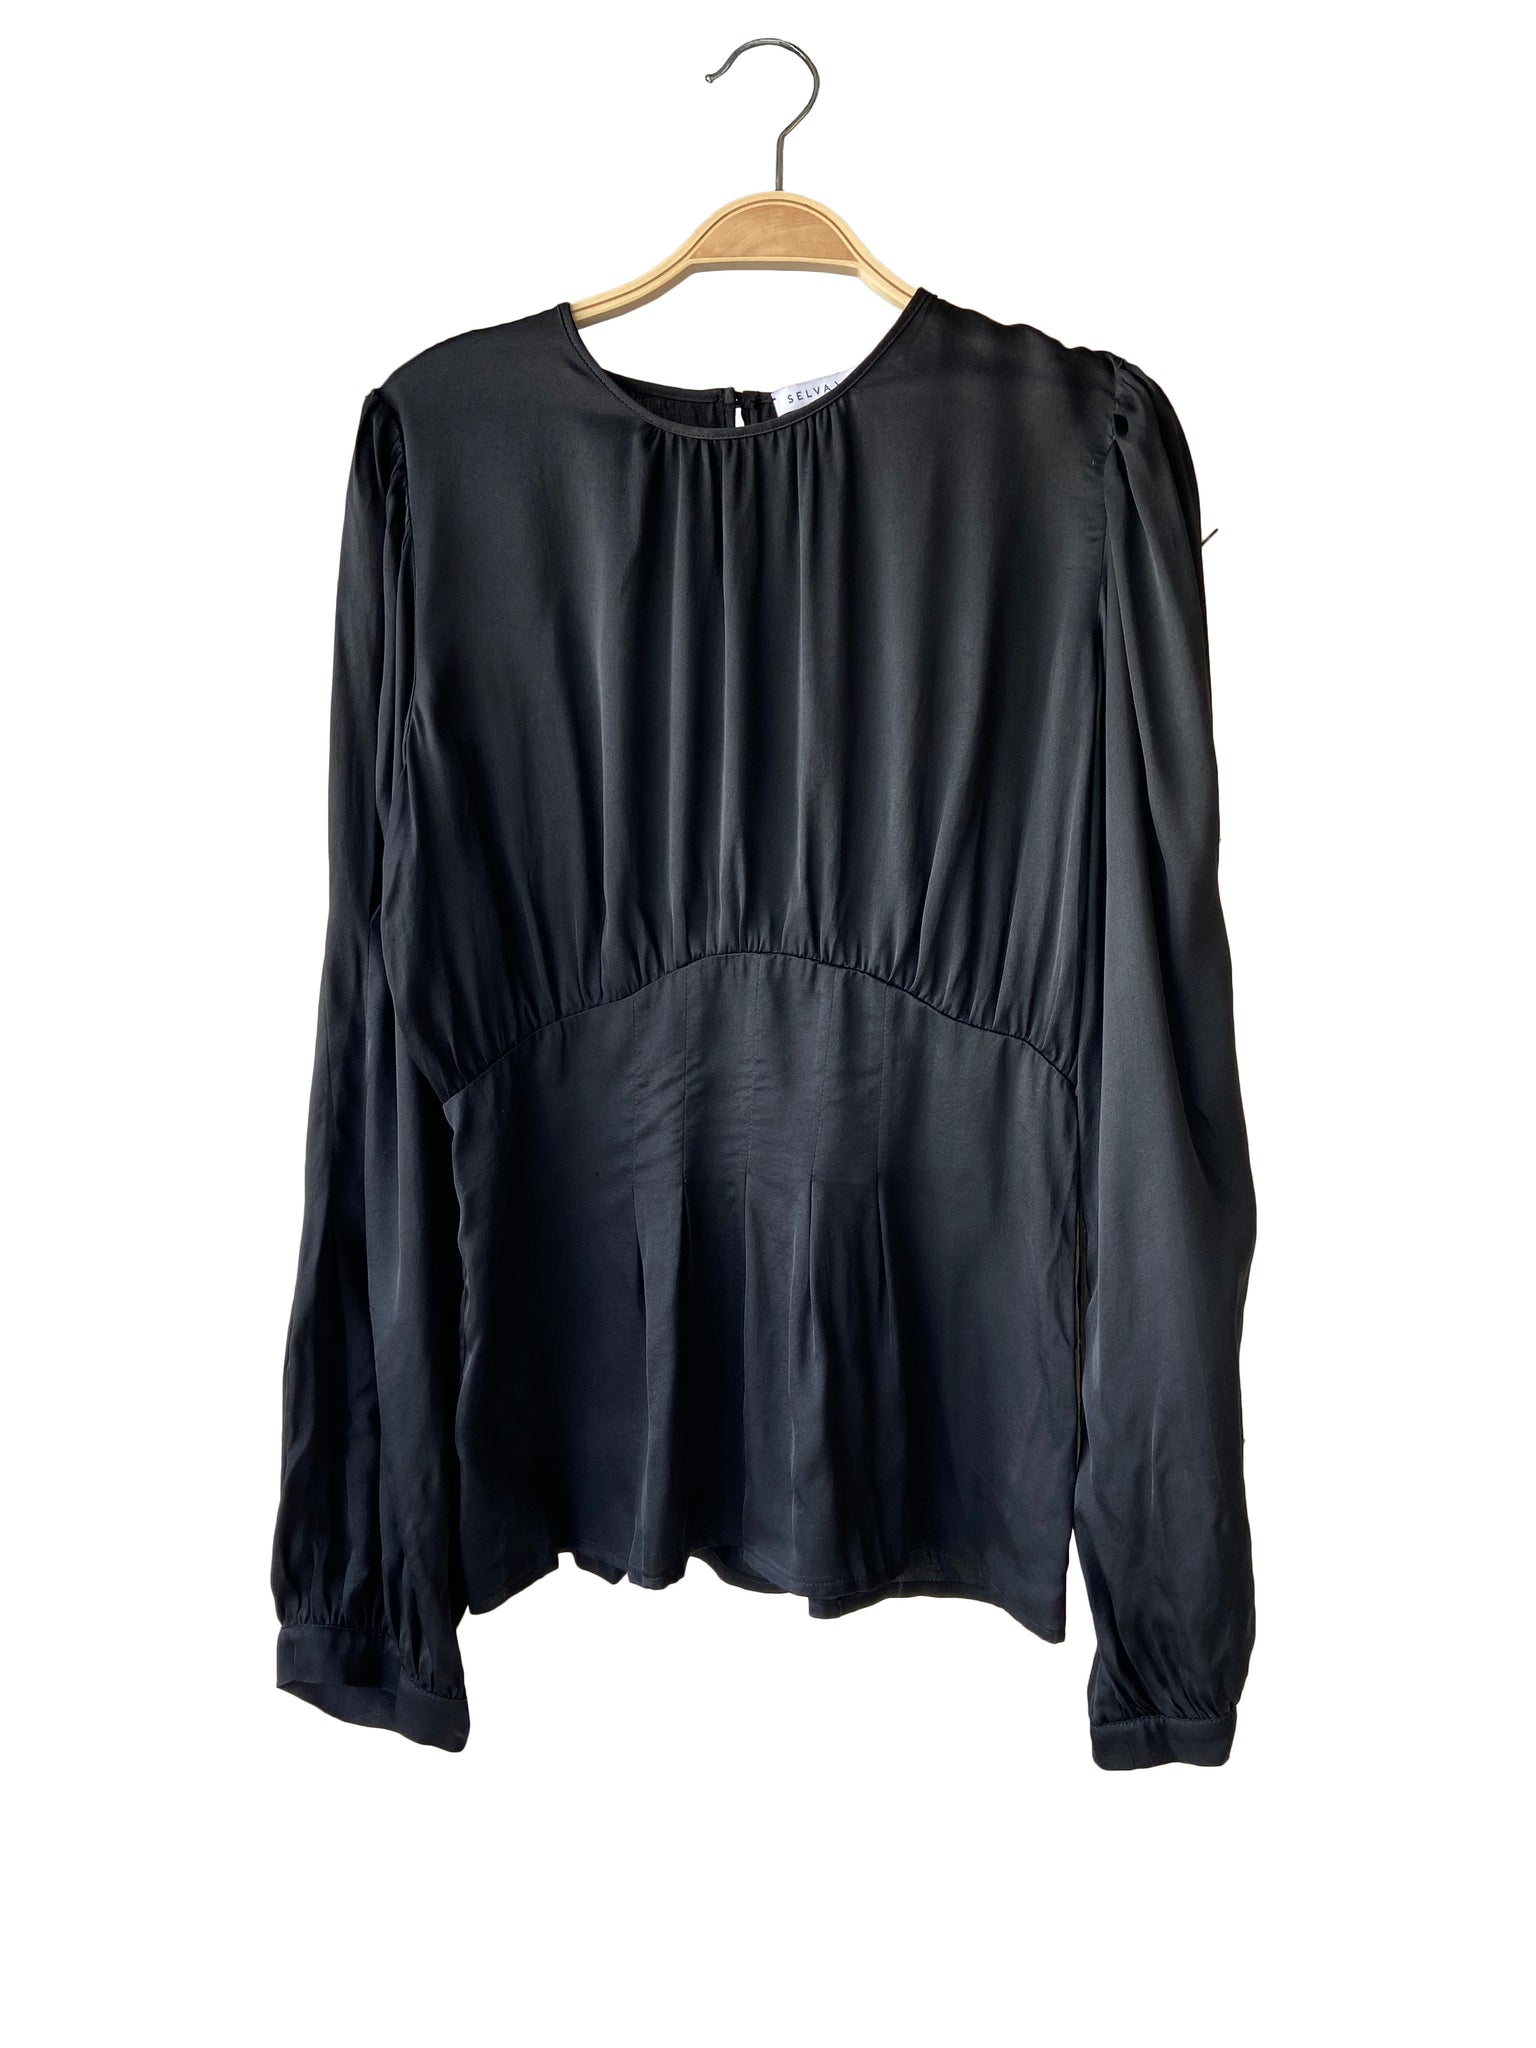 centra blouse in black rayon (size small)